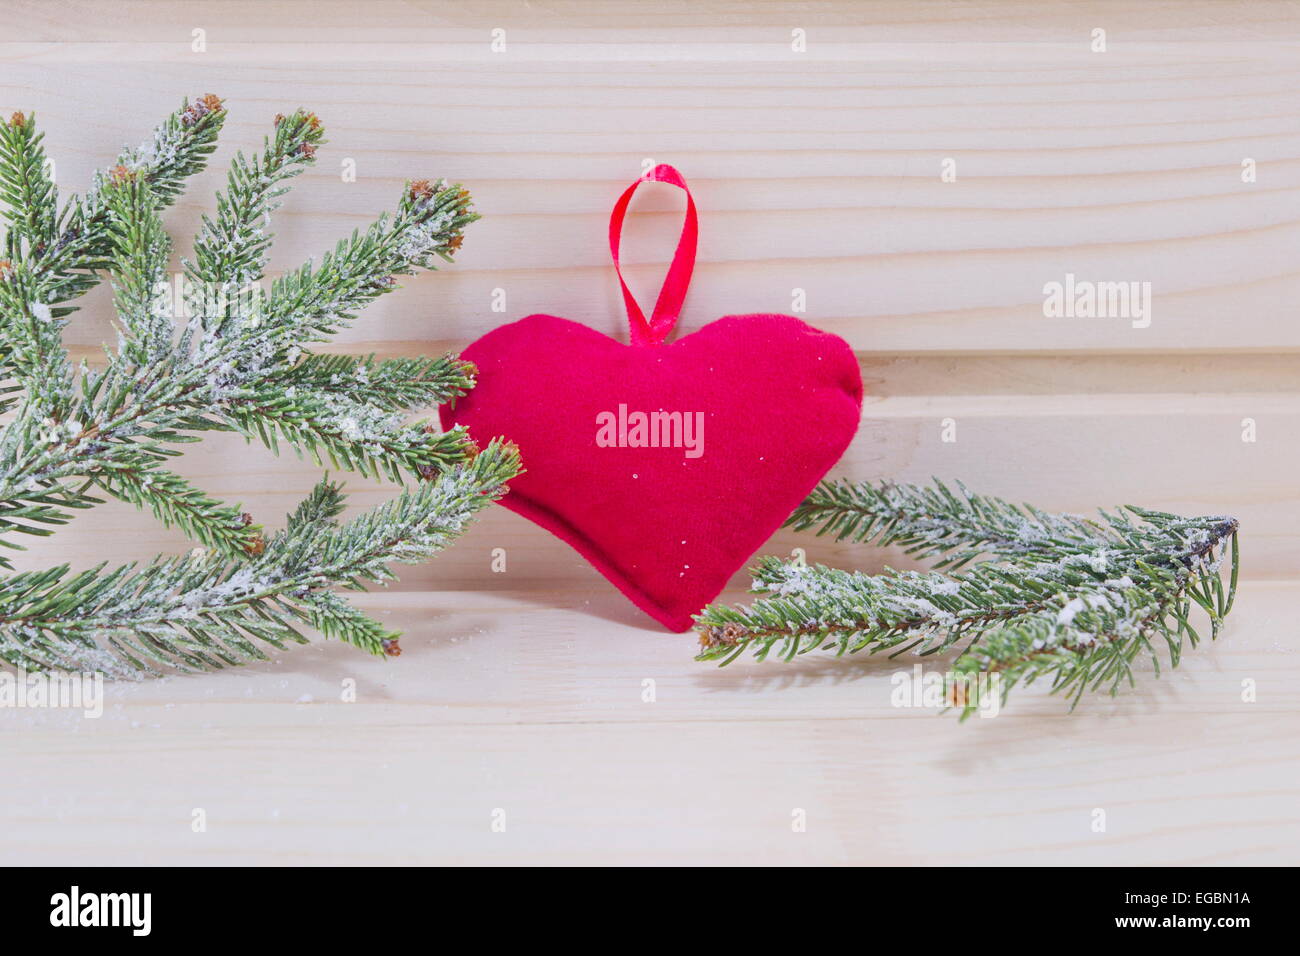 Heart and fir branches covered with snow on a wooden surface Stock Photo